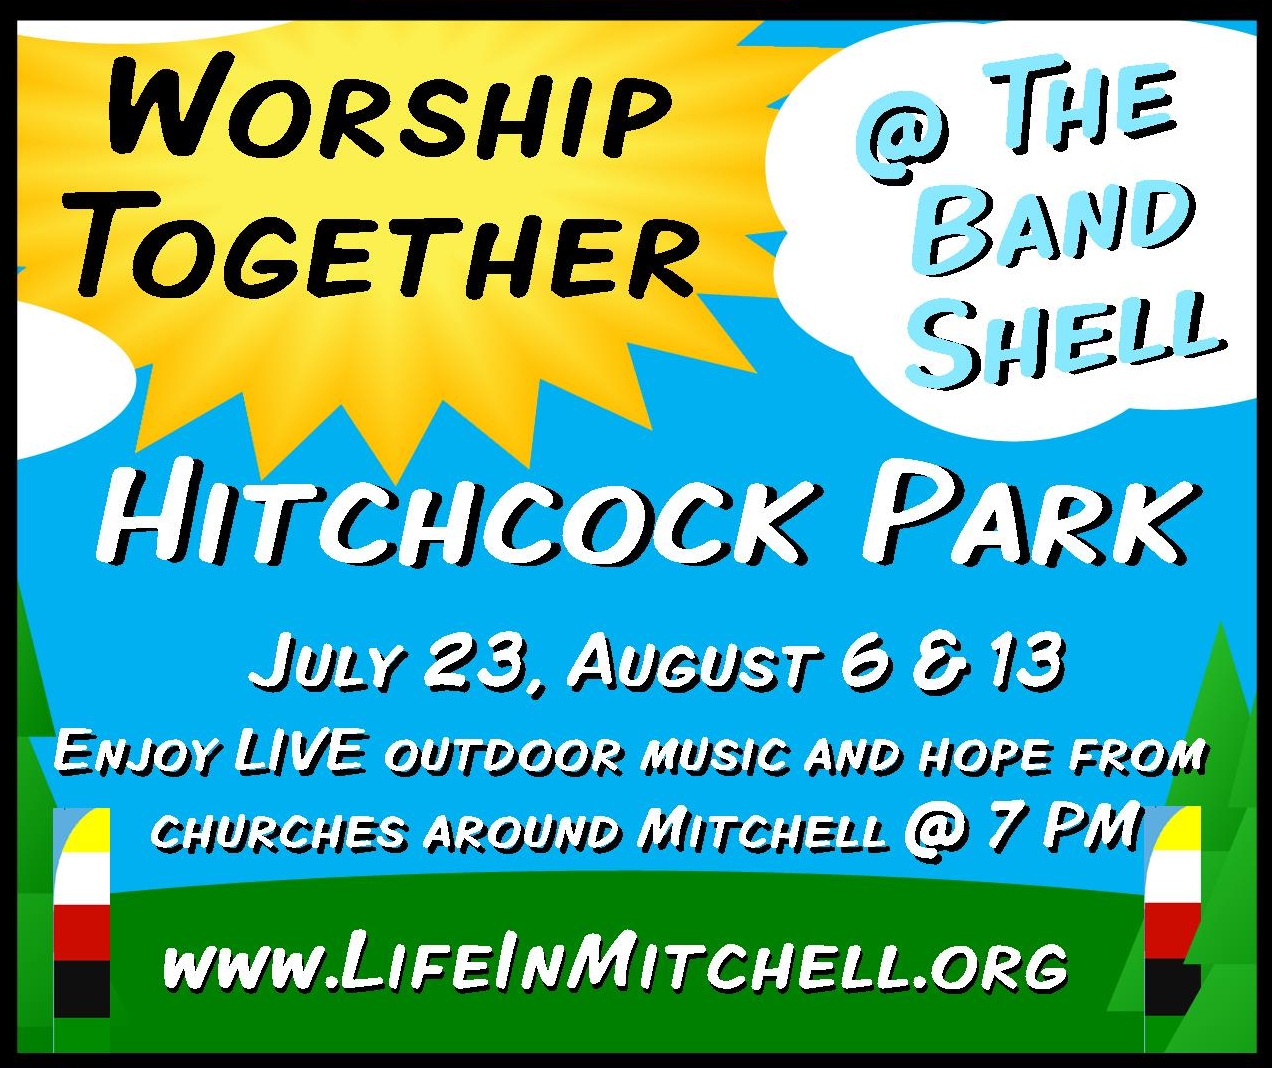 Worship Together in Hitchcock Park